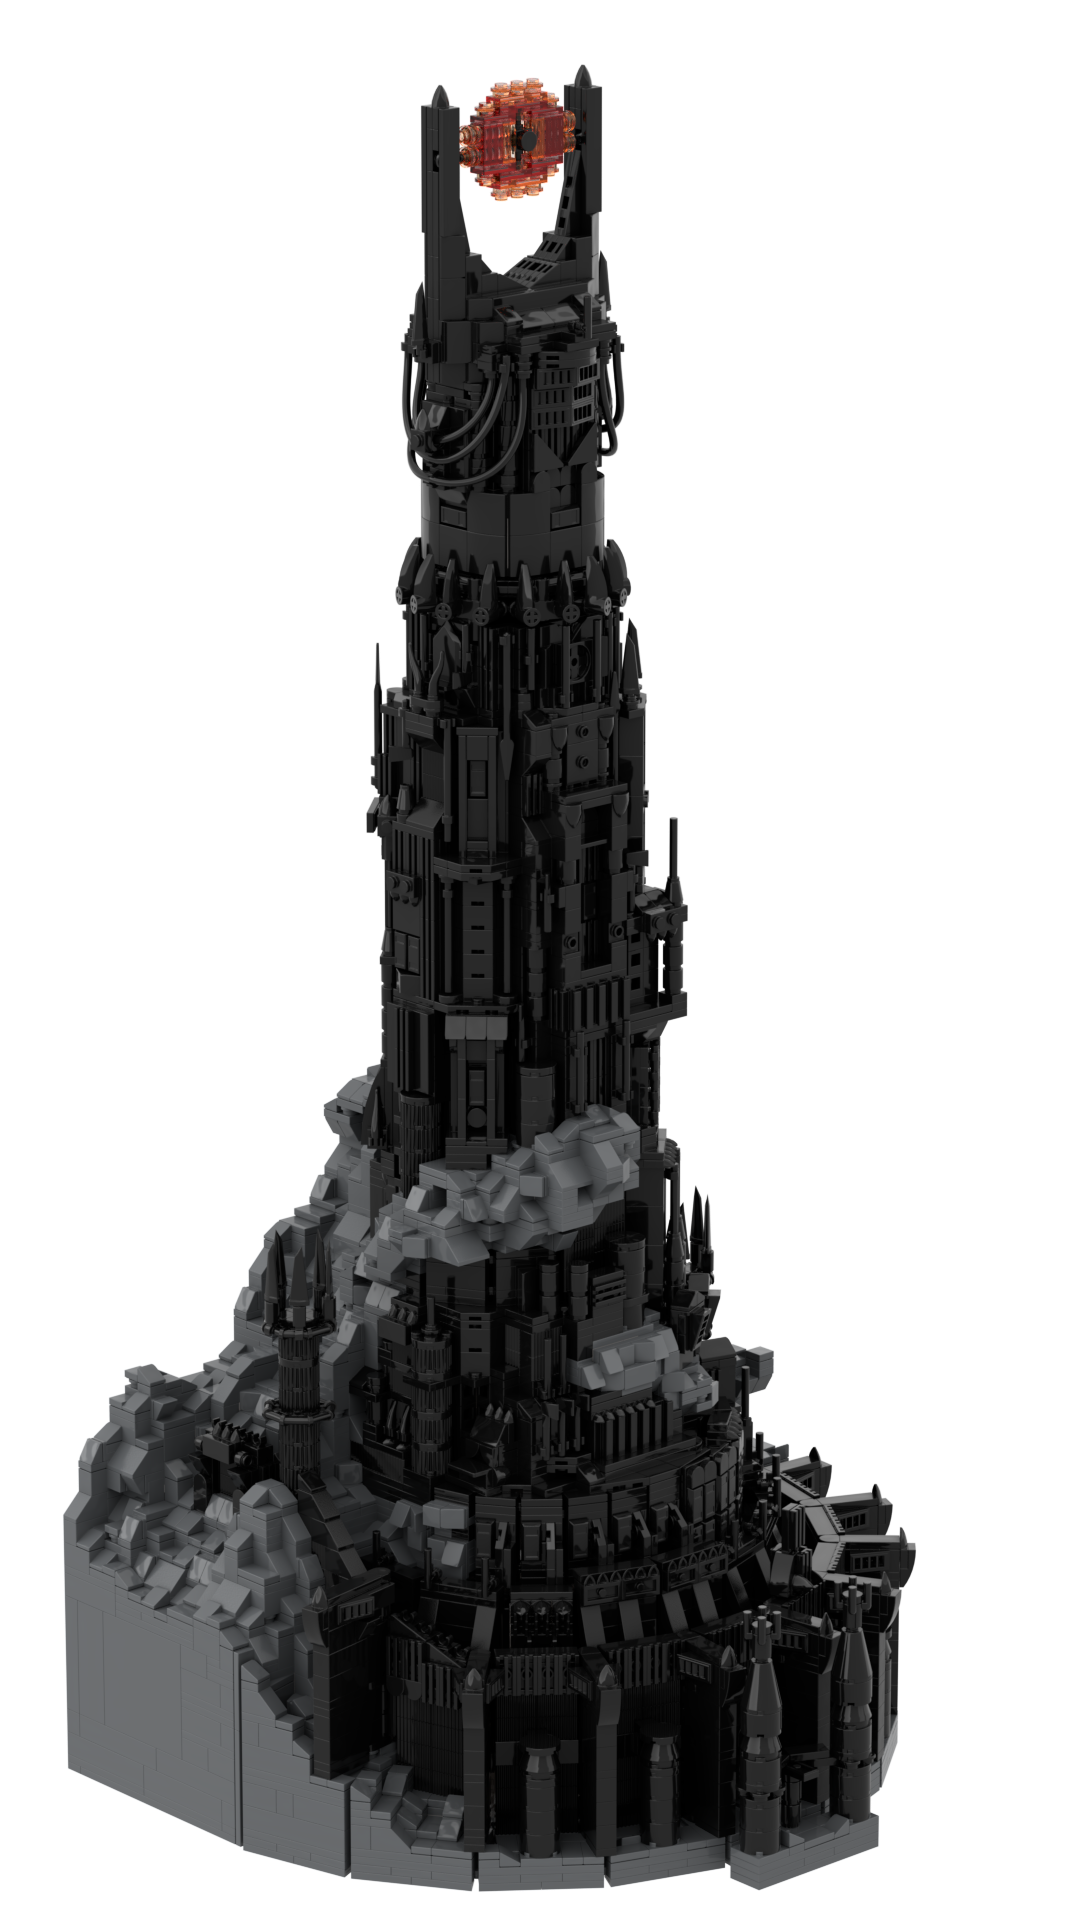 Movie MOC-126262 The Lord of the Rings Barad-dûr Dark Tower MOCBRICKLAND